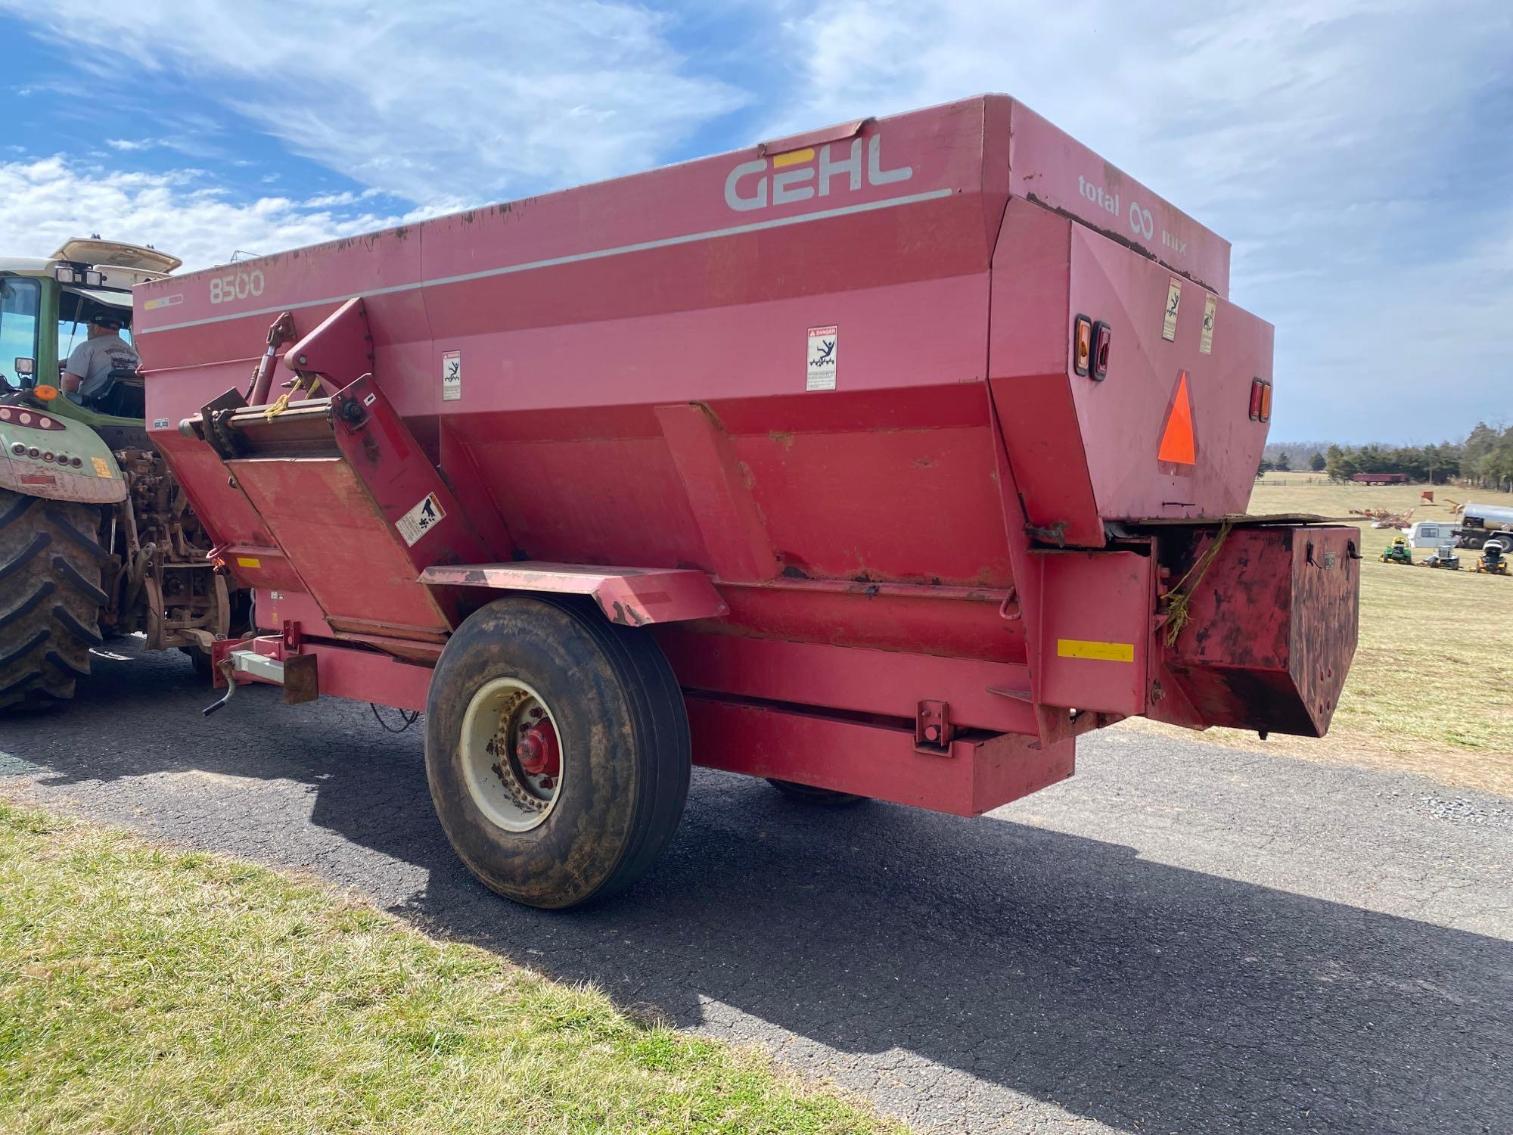 Image for Gehl 8500 Auger Mixer Feed Cart Per Seller Shed Kept Ready to Go to Work, Needs Scale Heads,1 Owner 